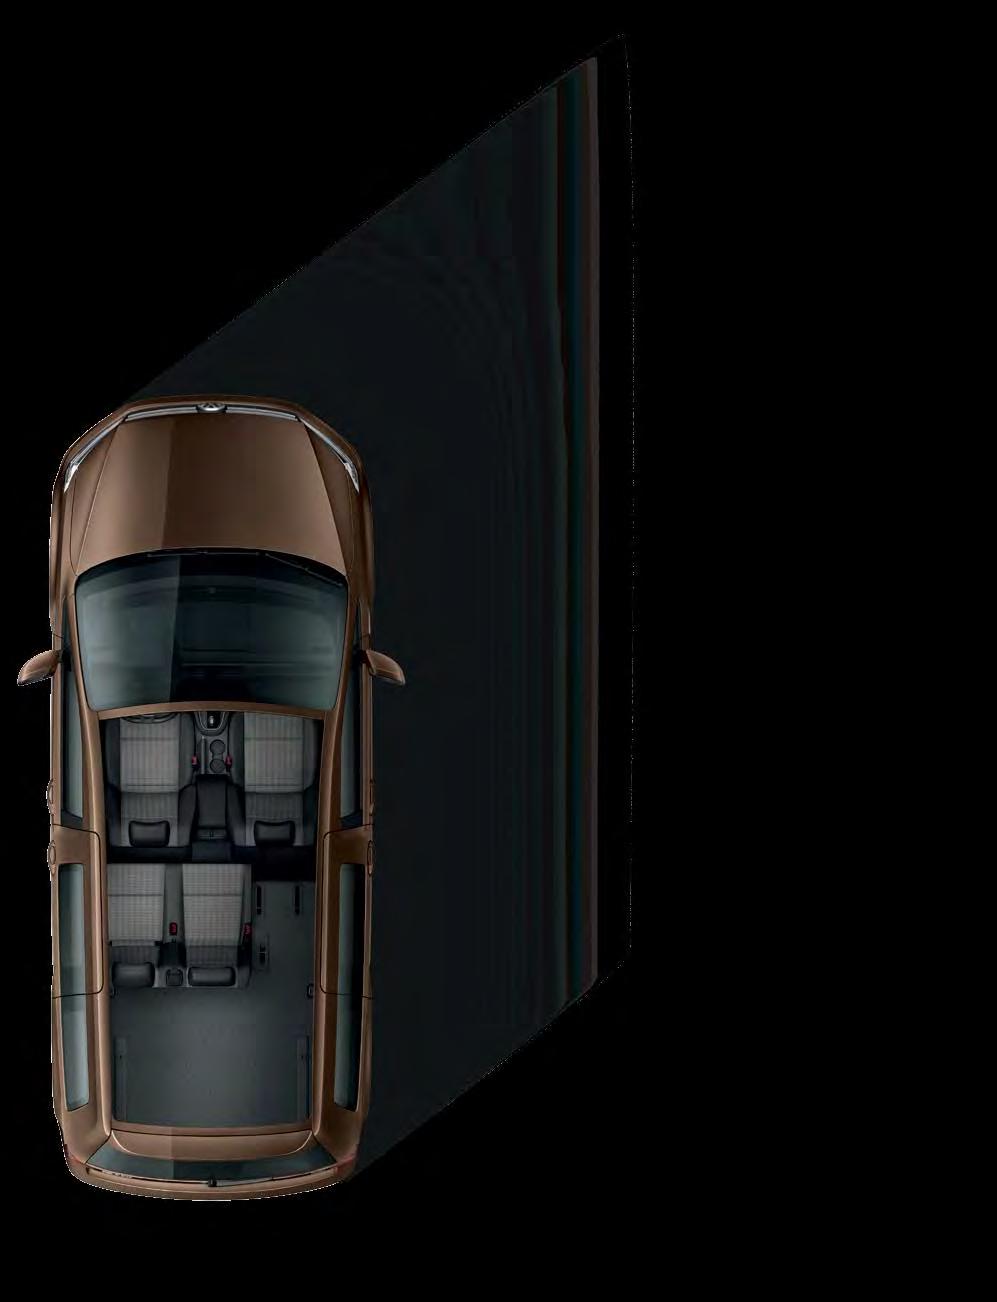 The rear seats in the Caddy can be folded, and completely removed sometimes even independently of each other. The single seats in the second seating row can even be double-folded if necessary.